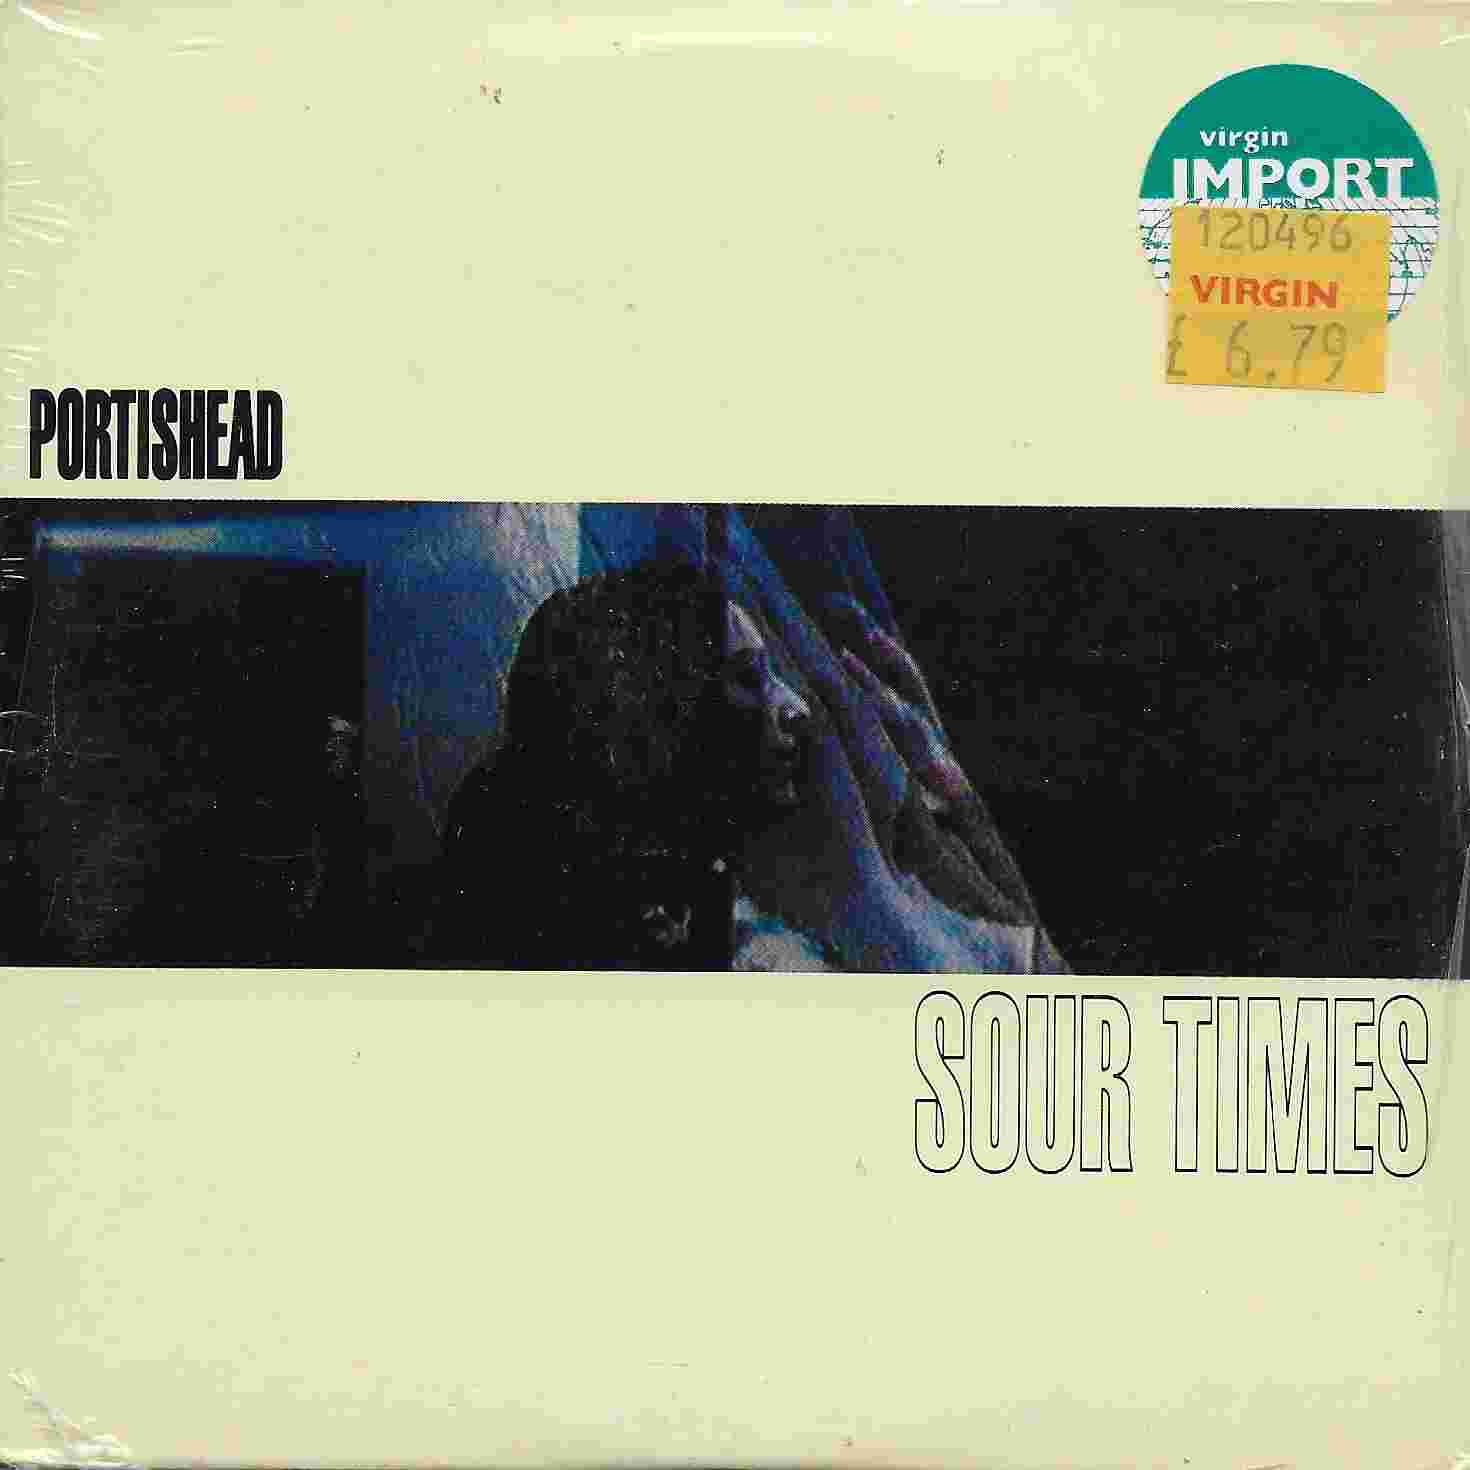 Picture of MP 8576132 Sour times - Australian import by artist Portishead  